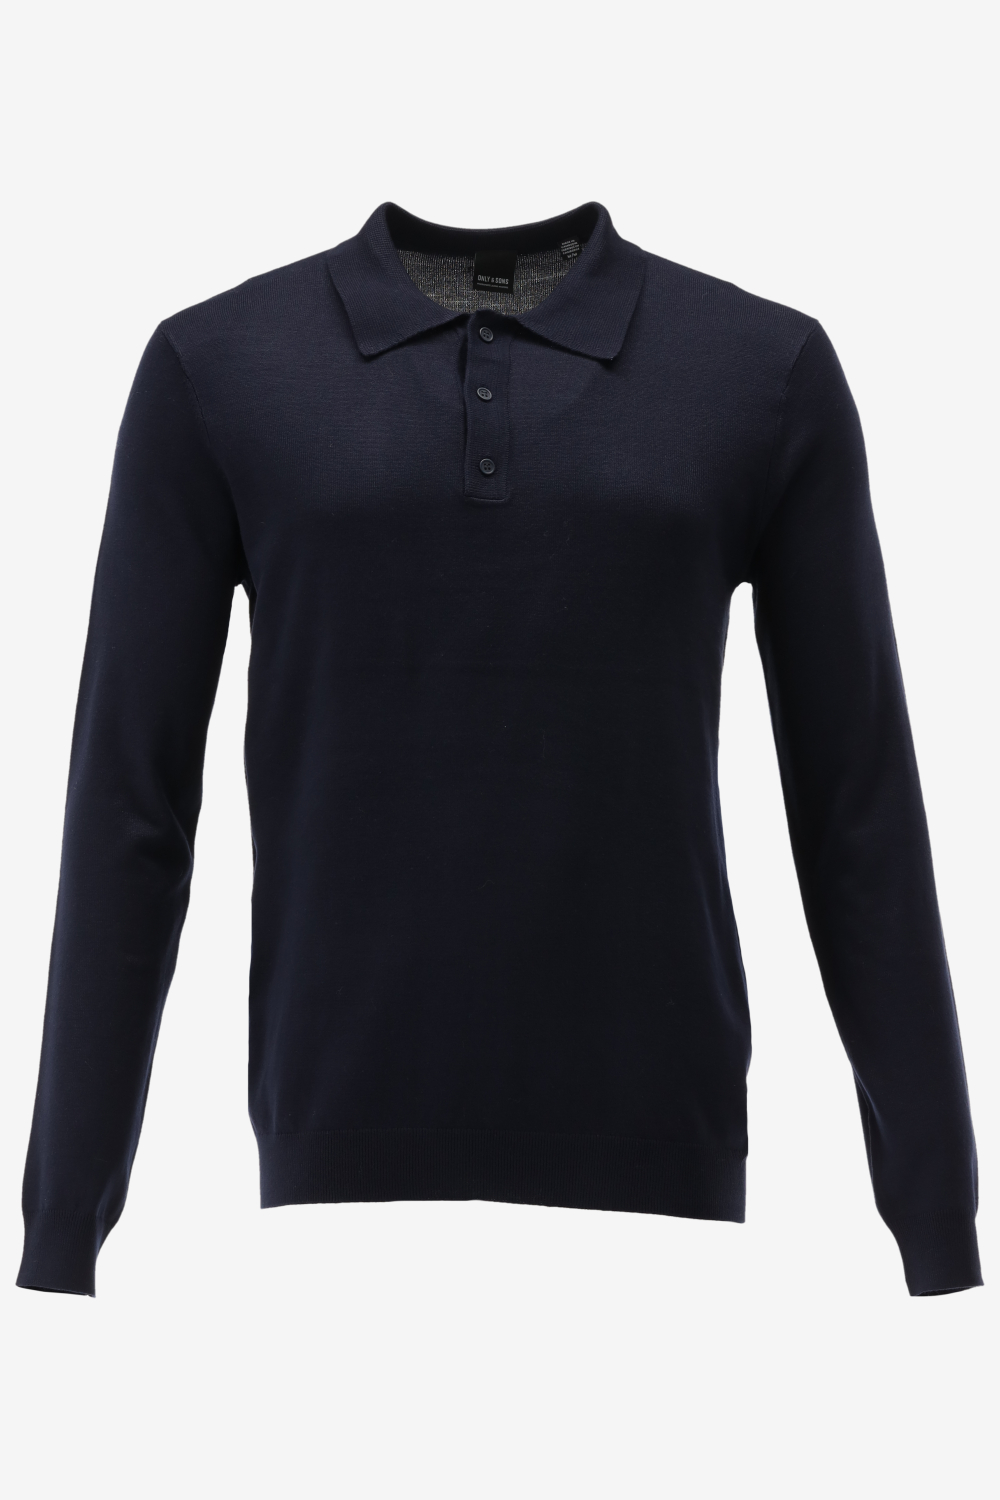 ONLY & SONS ONSWYLER LIFE REG 14 LS POLO KNIT Heren Trui - Maat M